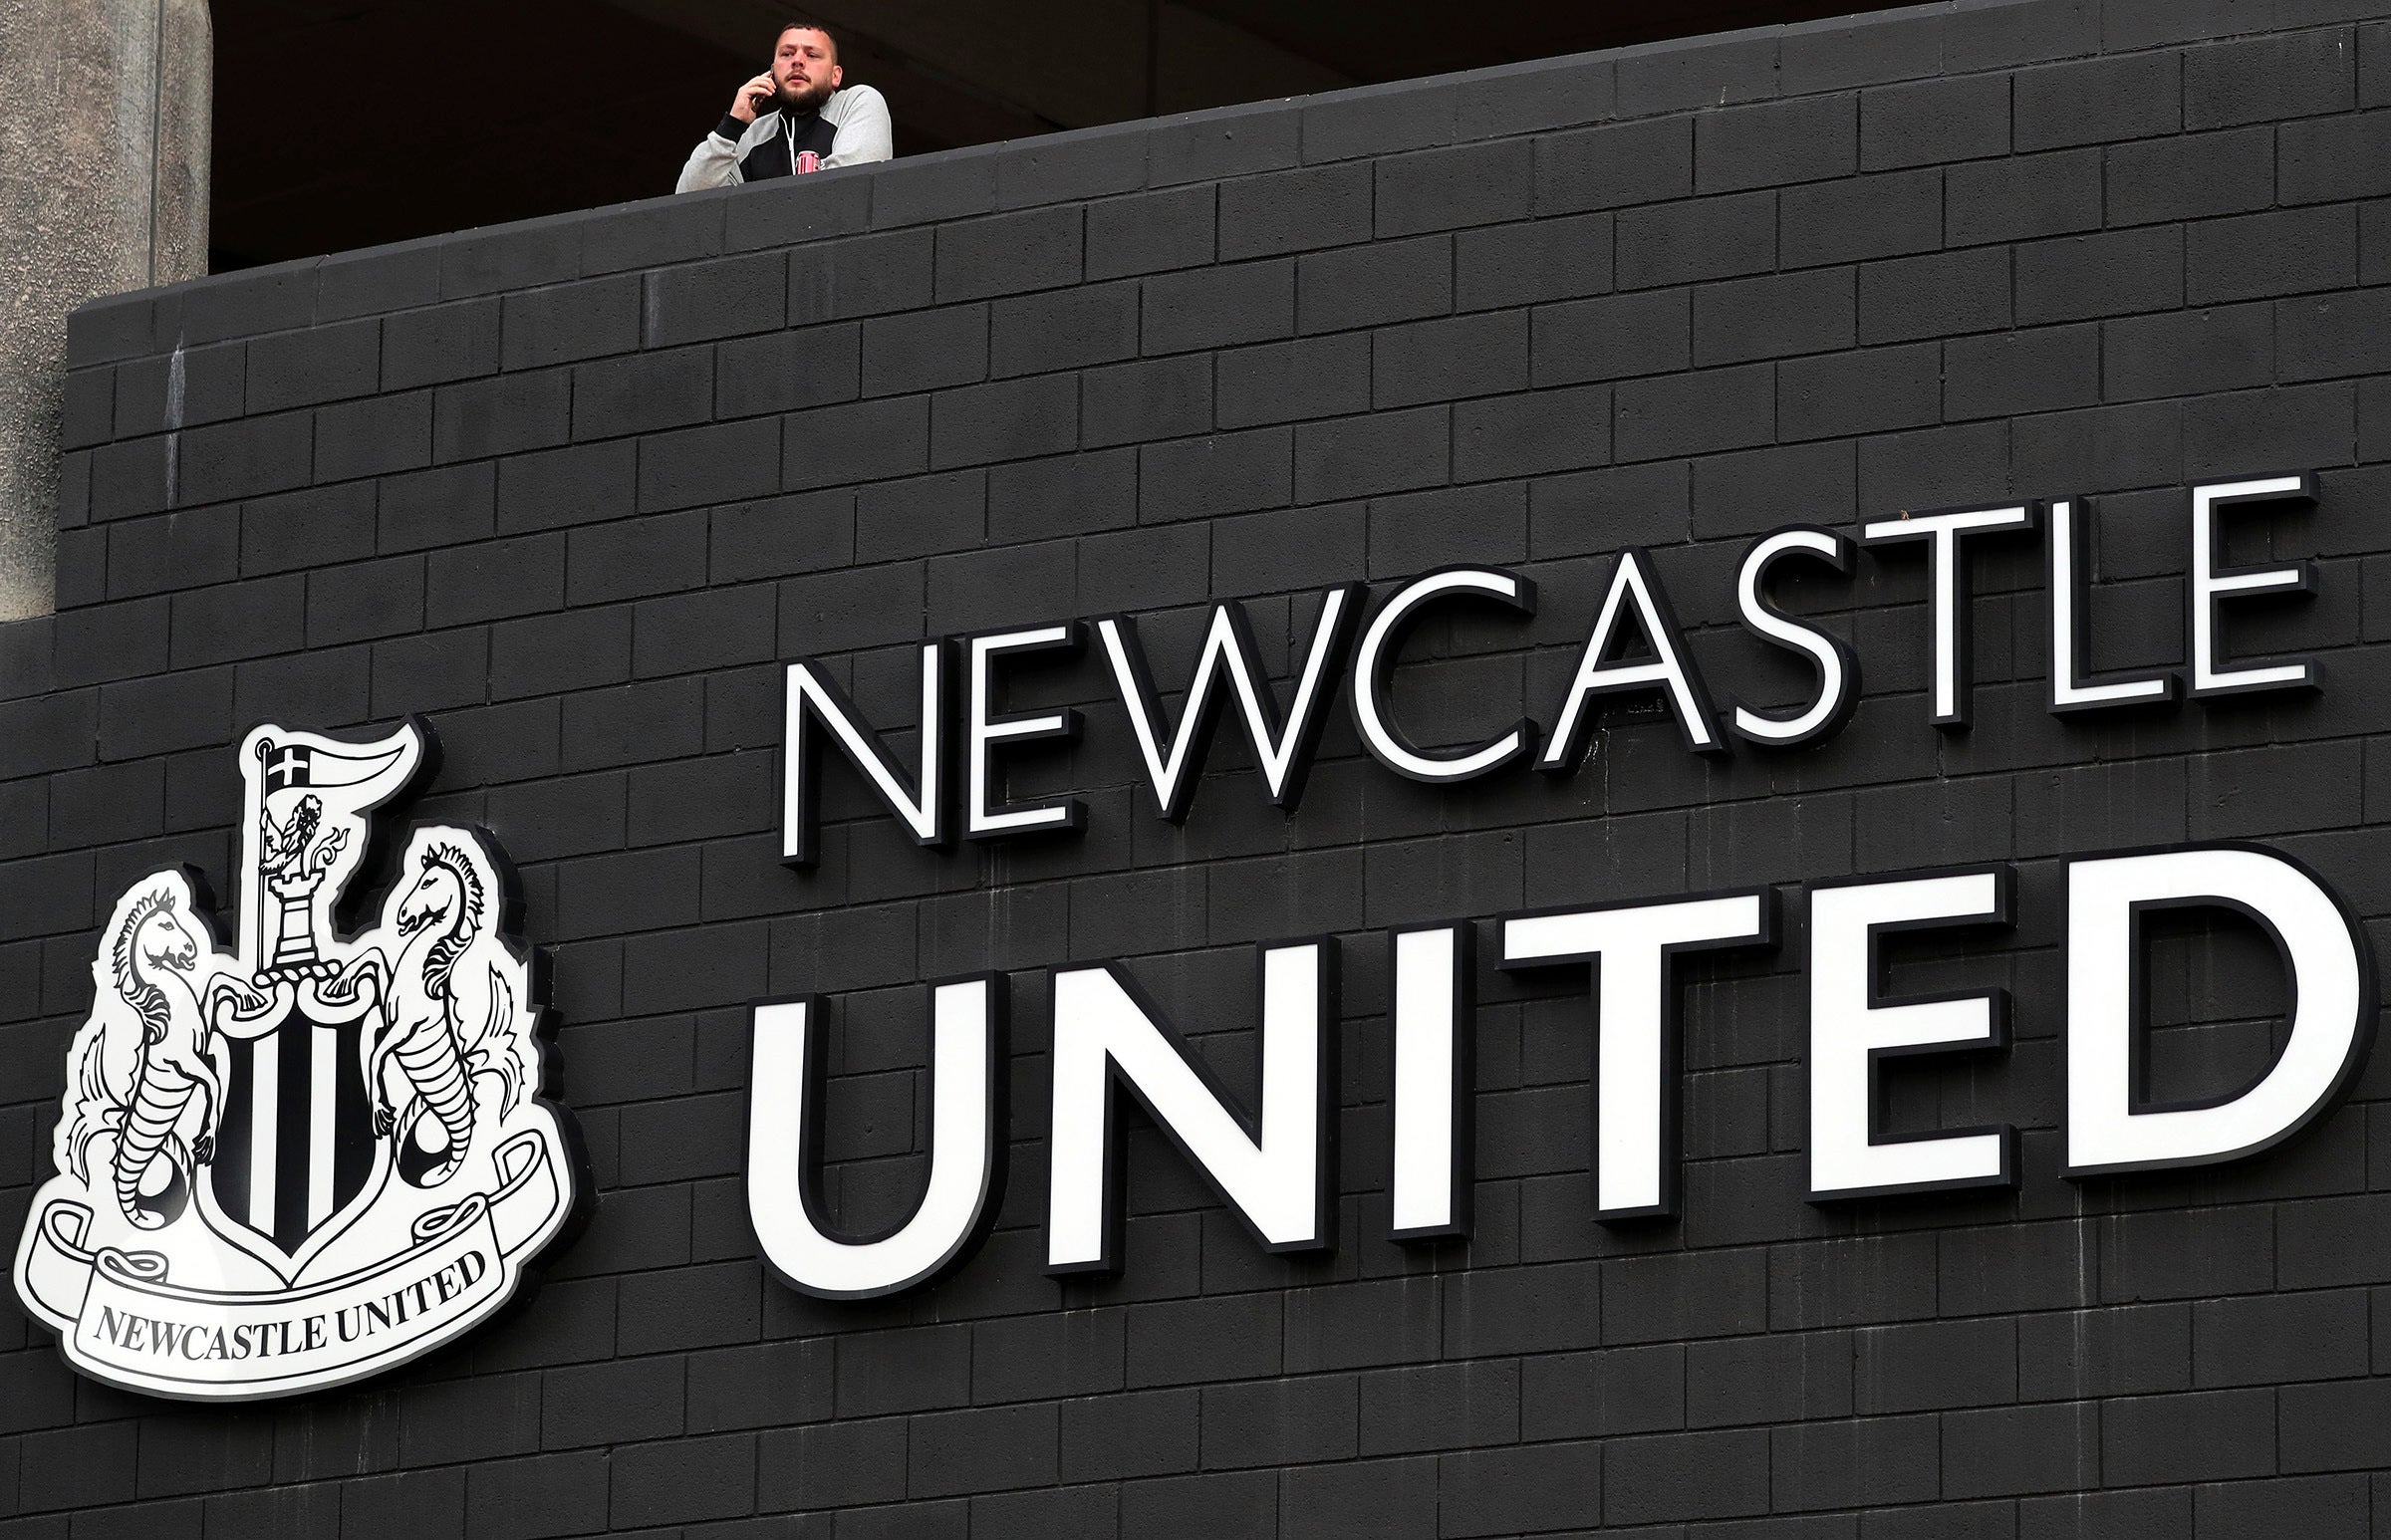 Newcastle United has been sold to a Saudi-led consortium